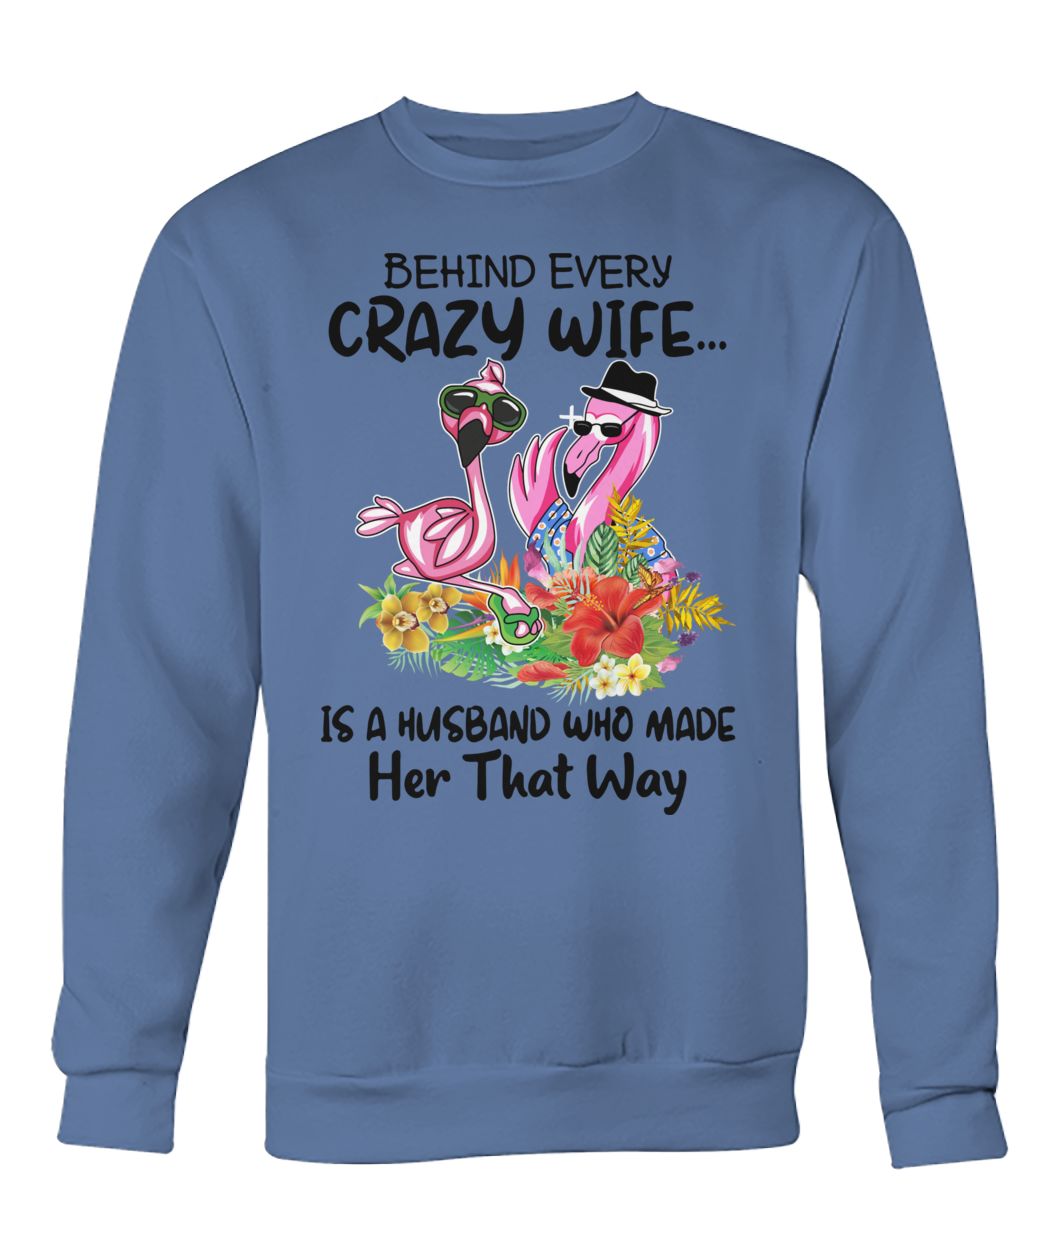 Flamingo behind every crazy wife is a husband who made her that way crew neck sweatshirt